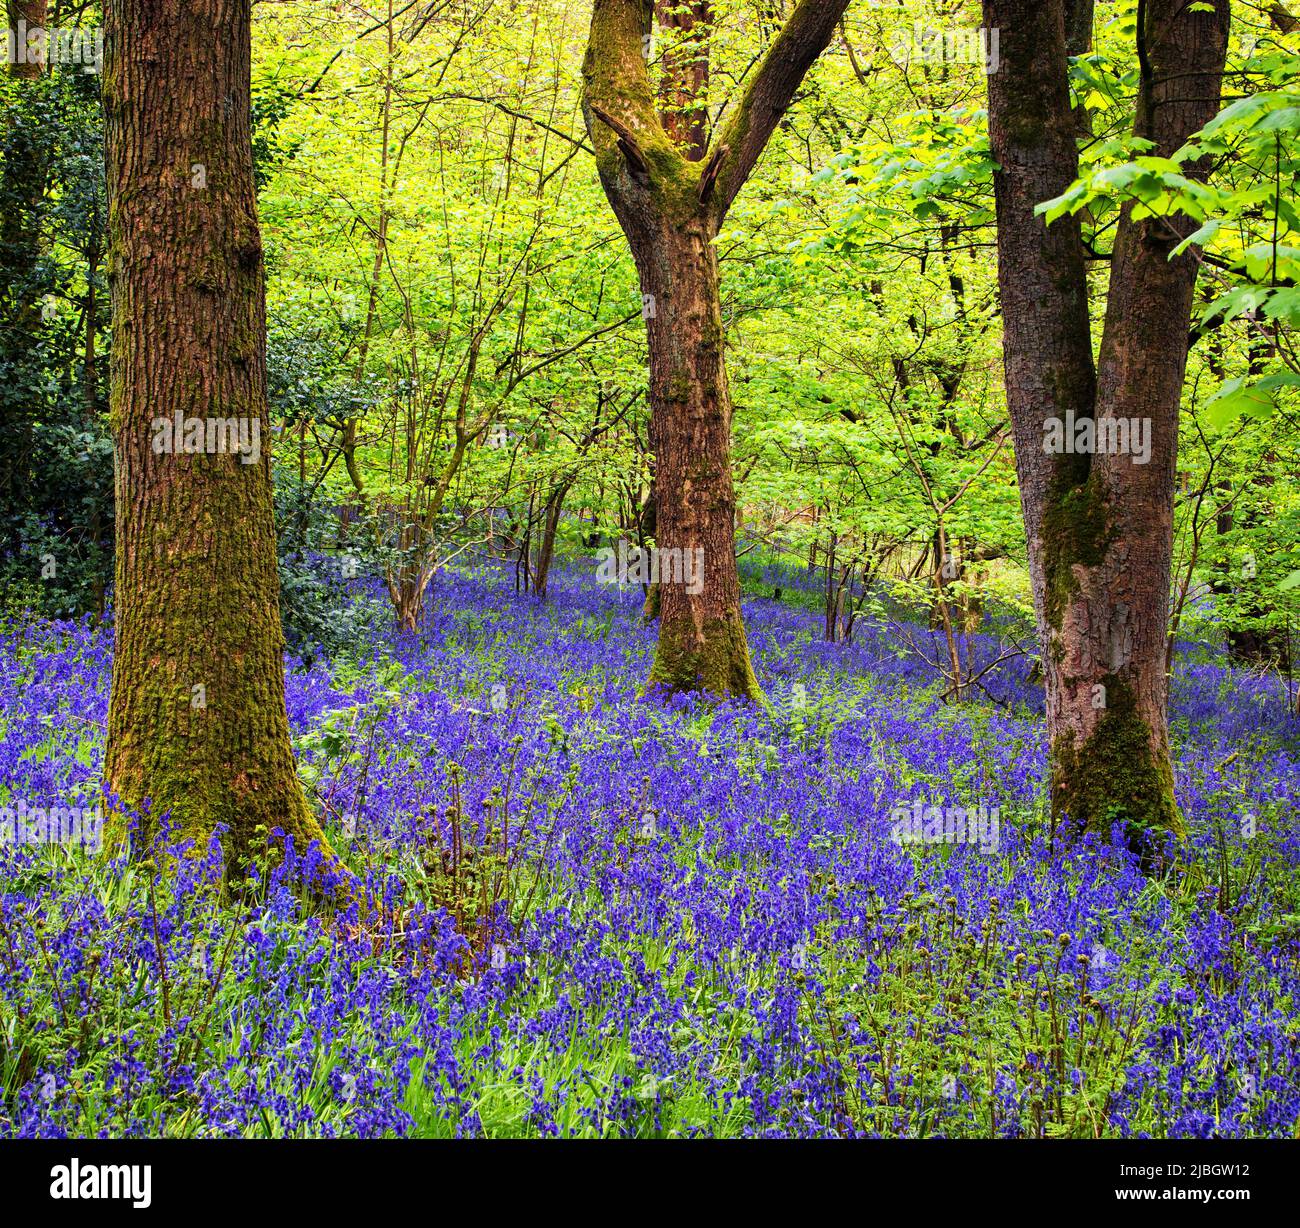 Bluebells in natural woodland, in an intimate abstract square format Stock Photo